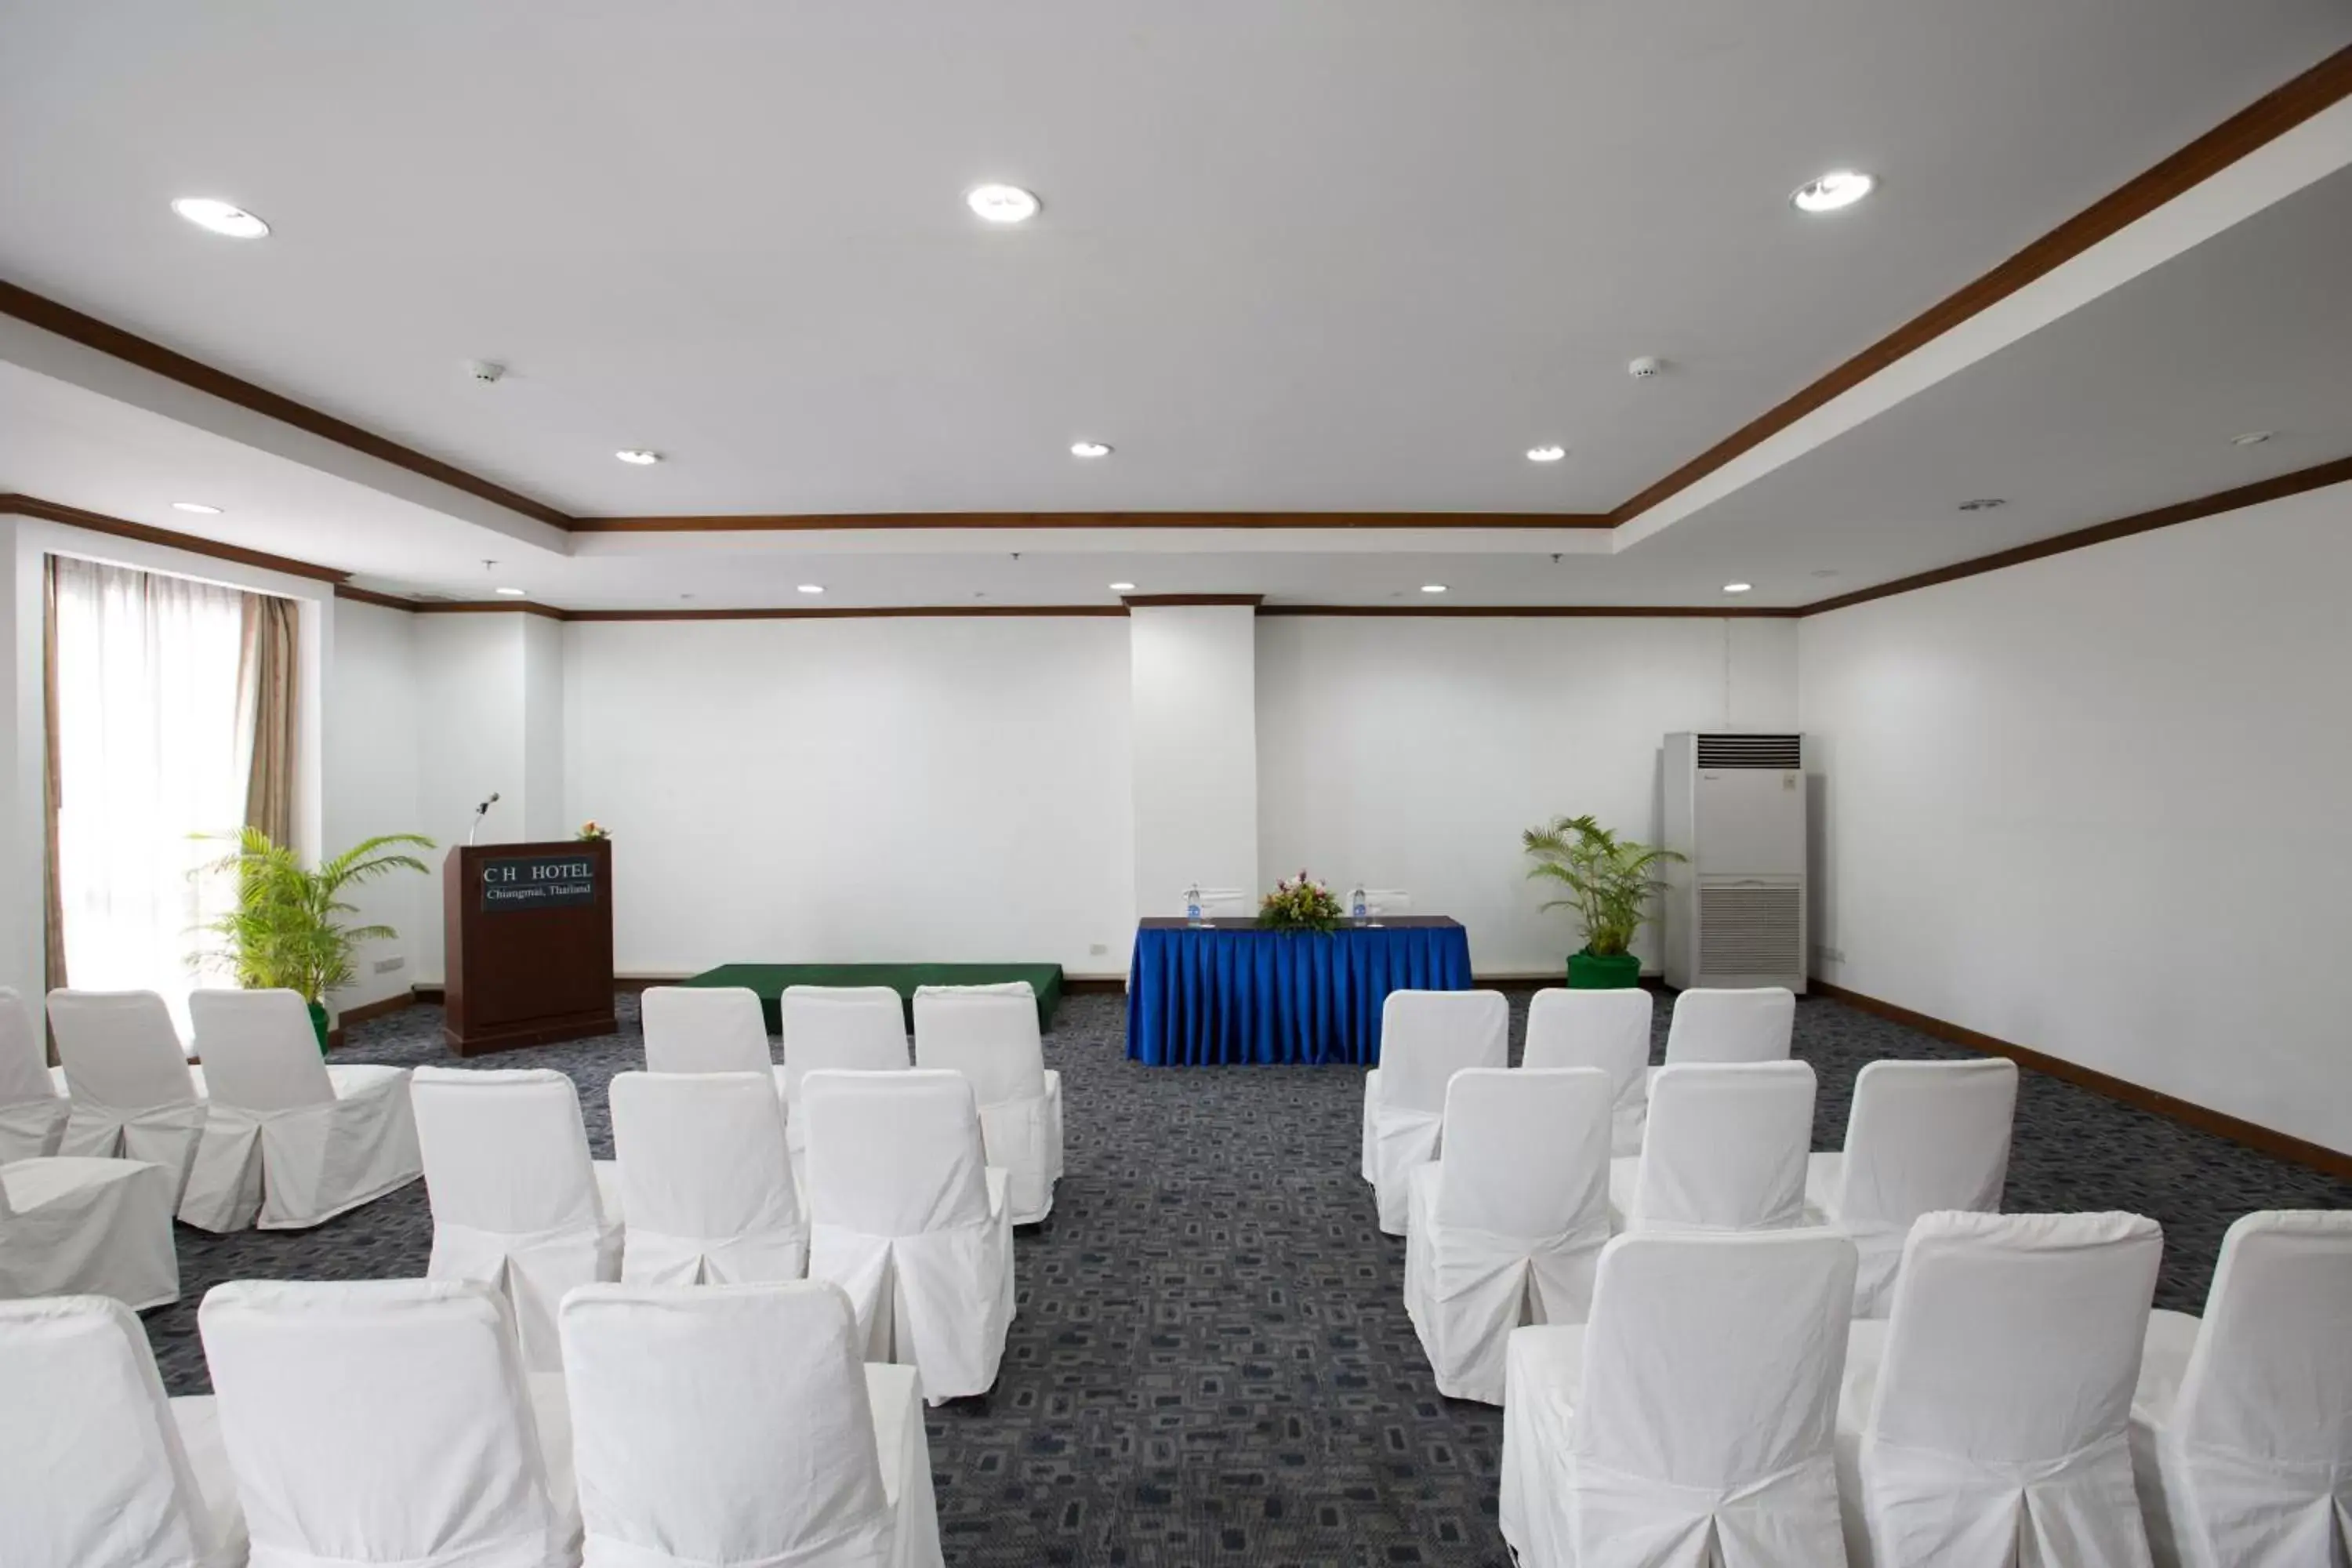 Meeting/conference room, Banquet Facilities in CH Hotel